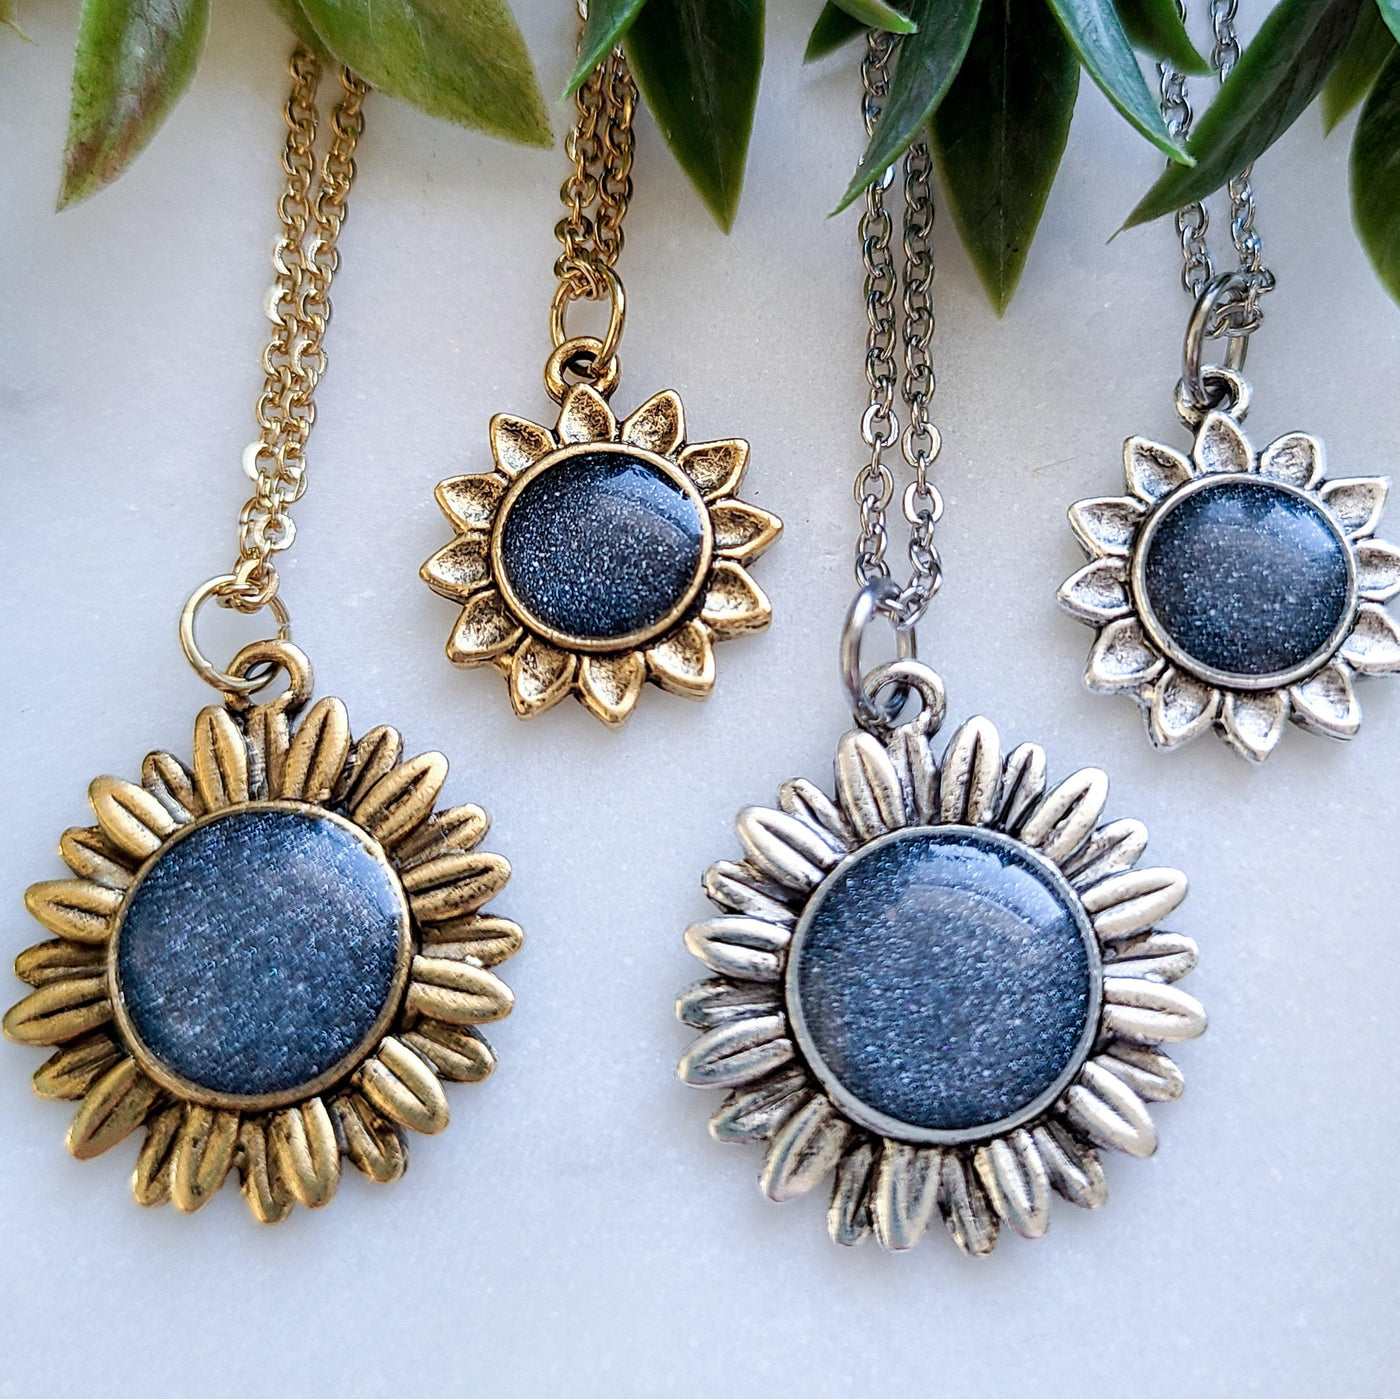 Sunflower & Aster Galaxy Resin Necklace - Little Blue Bus Jewelry